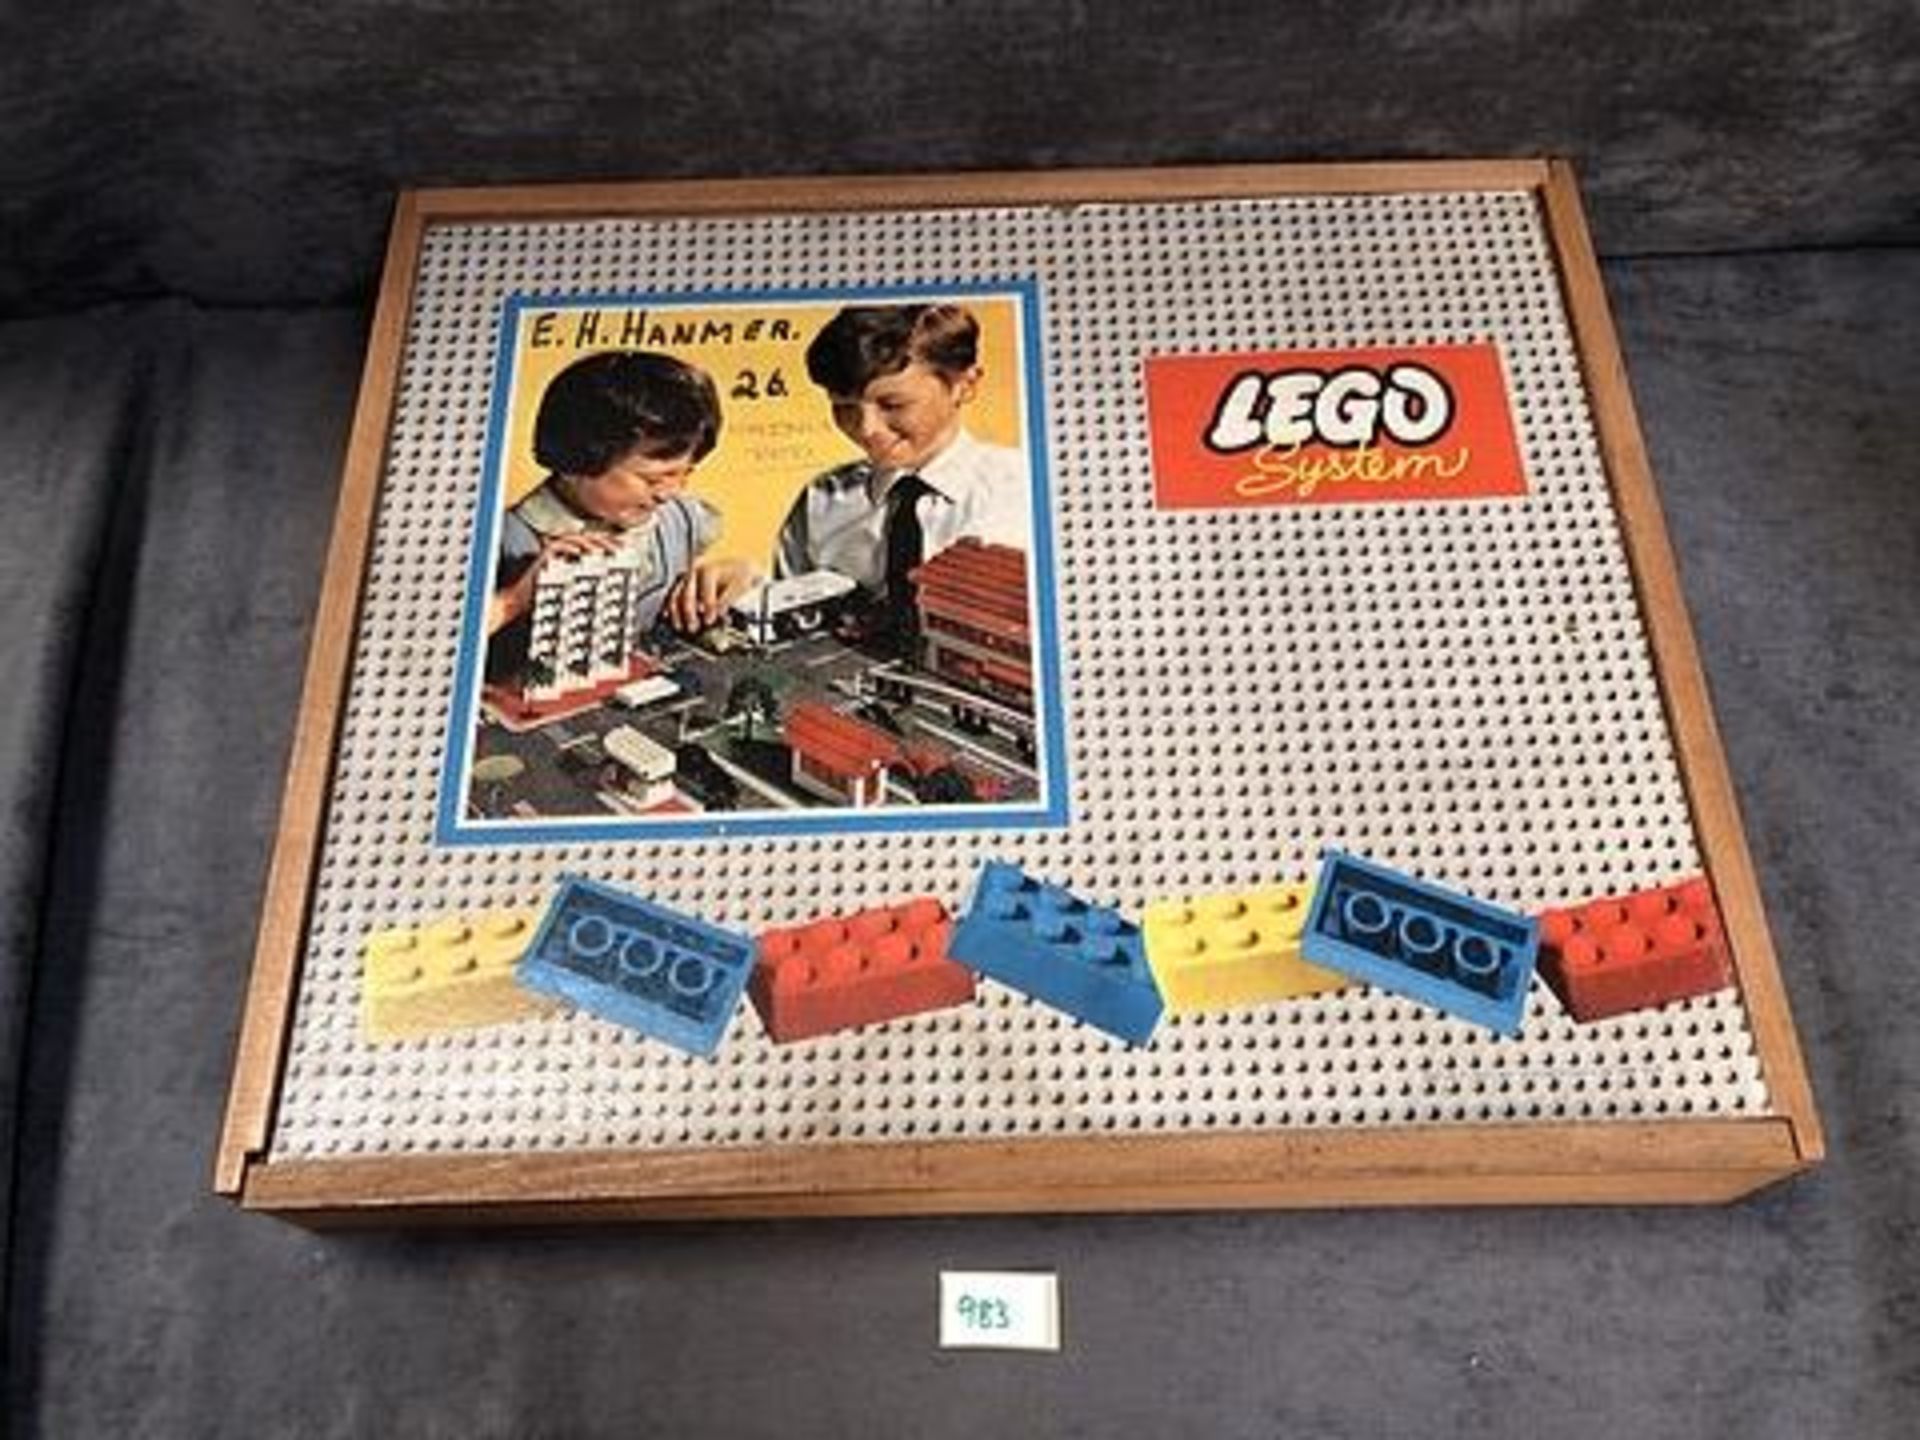 Lego Systems Large Wooden Box - Image 2 of 2